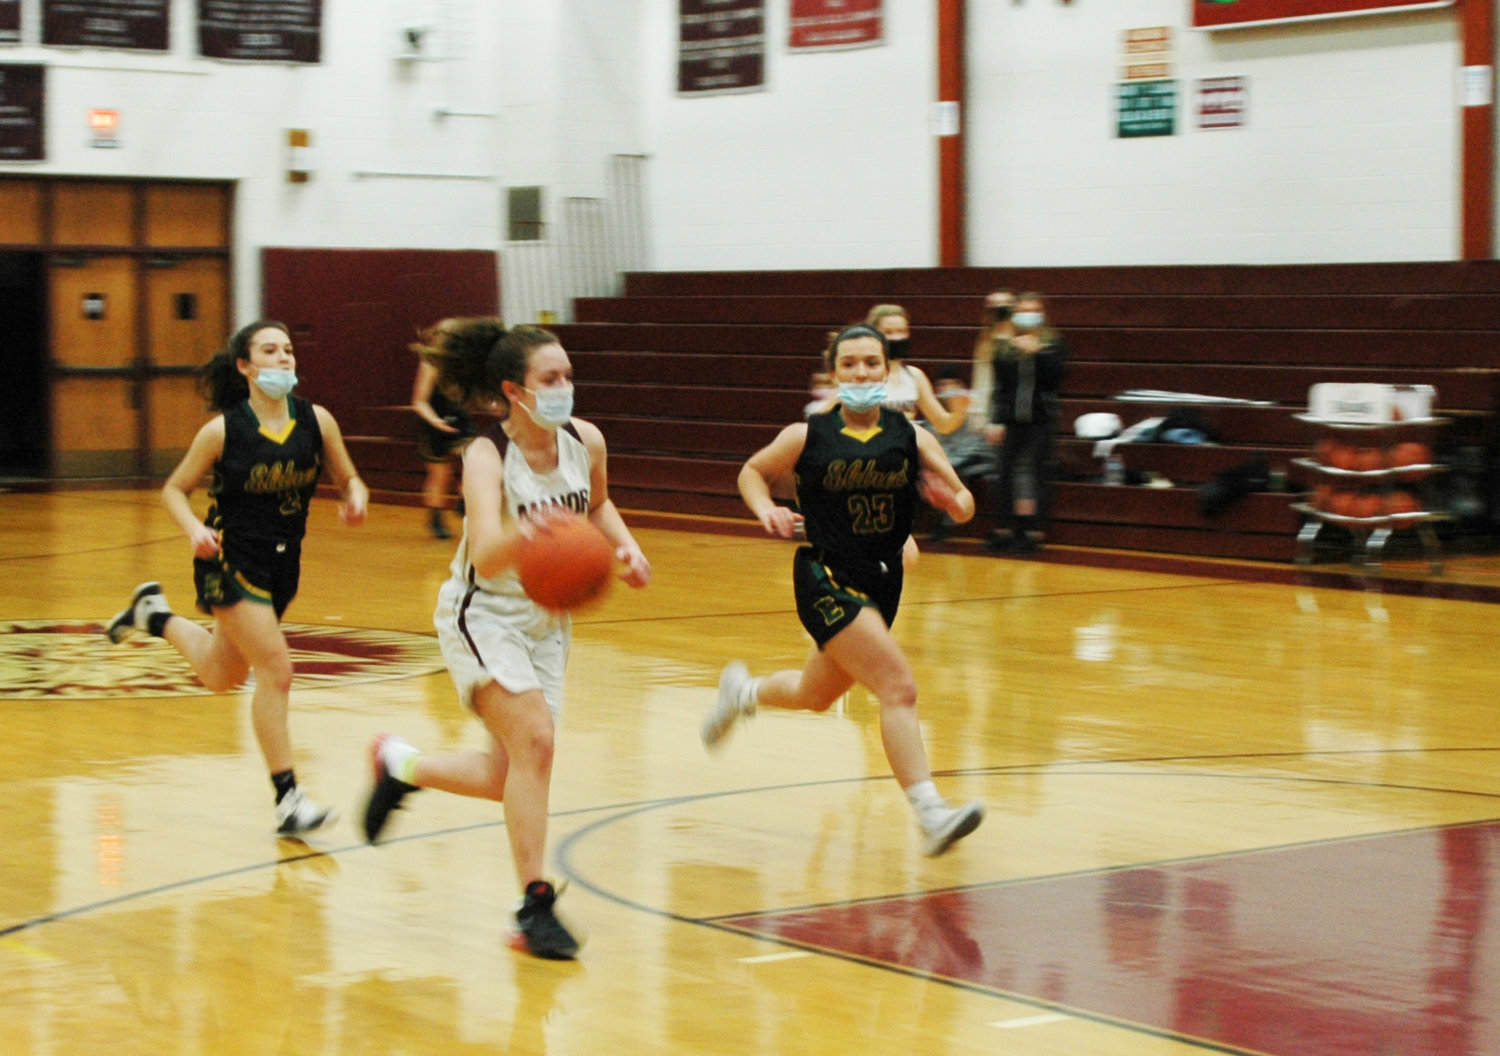 Davis runs the fast break after a steal. Turning defense into offense became routine for number 24 during the season.